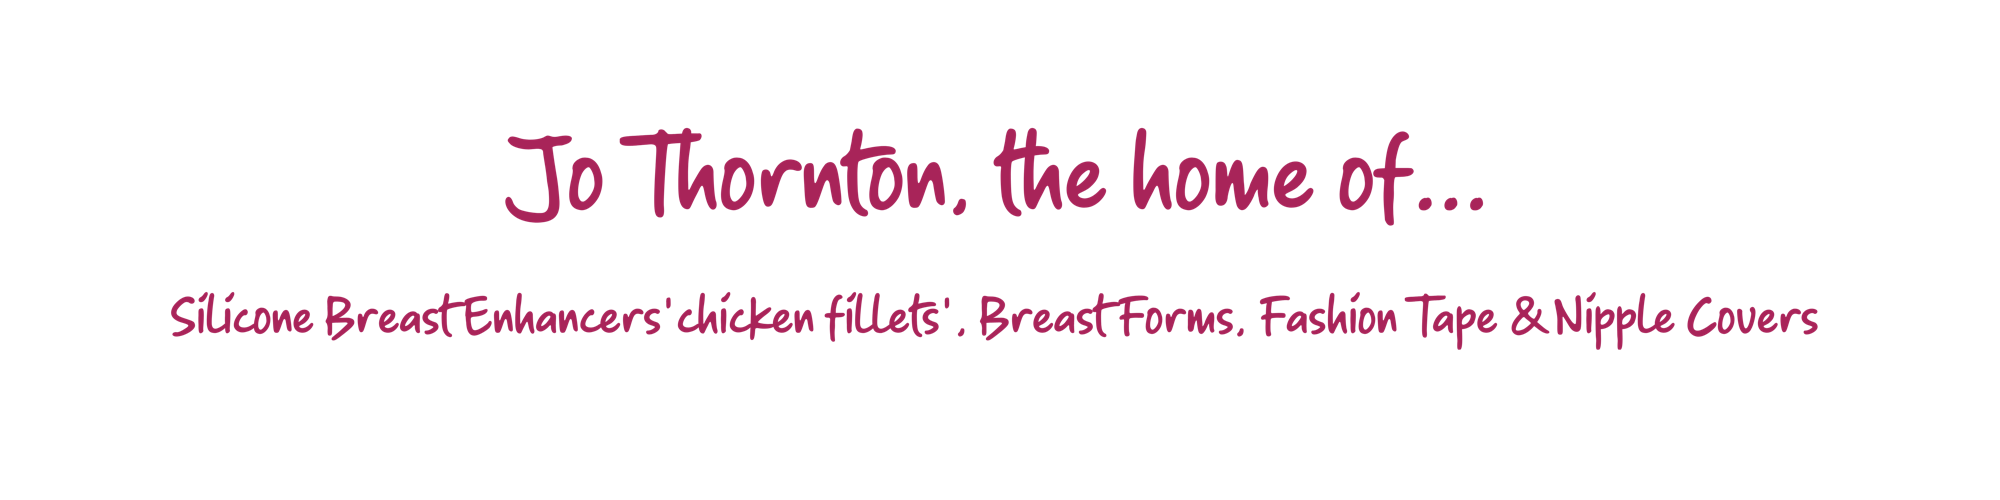 Silicone breast enhancers 'chicken fillets', breast forms, fashion tape and nipple covers